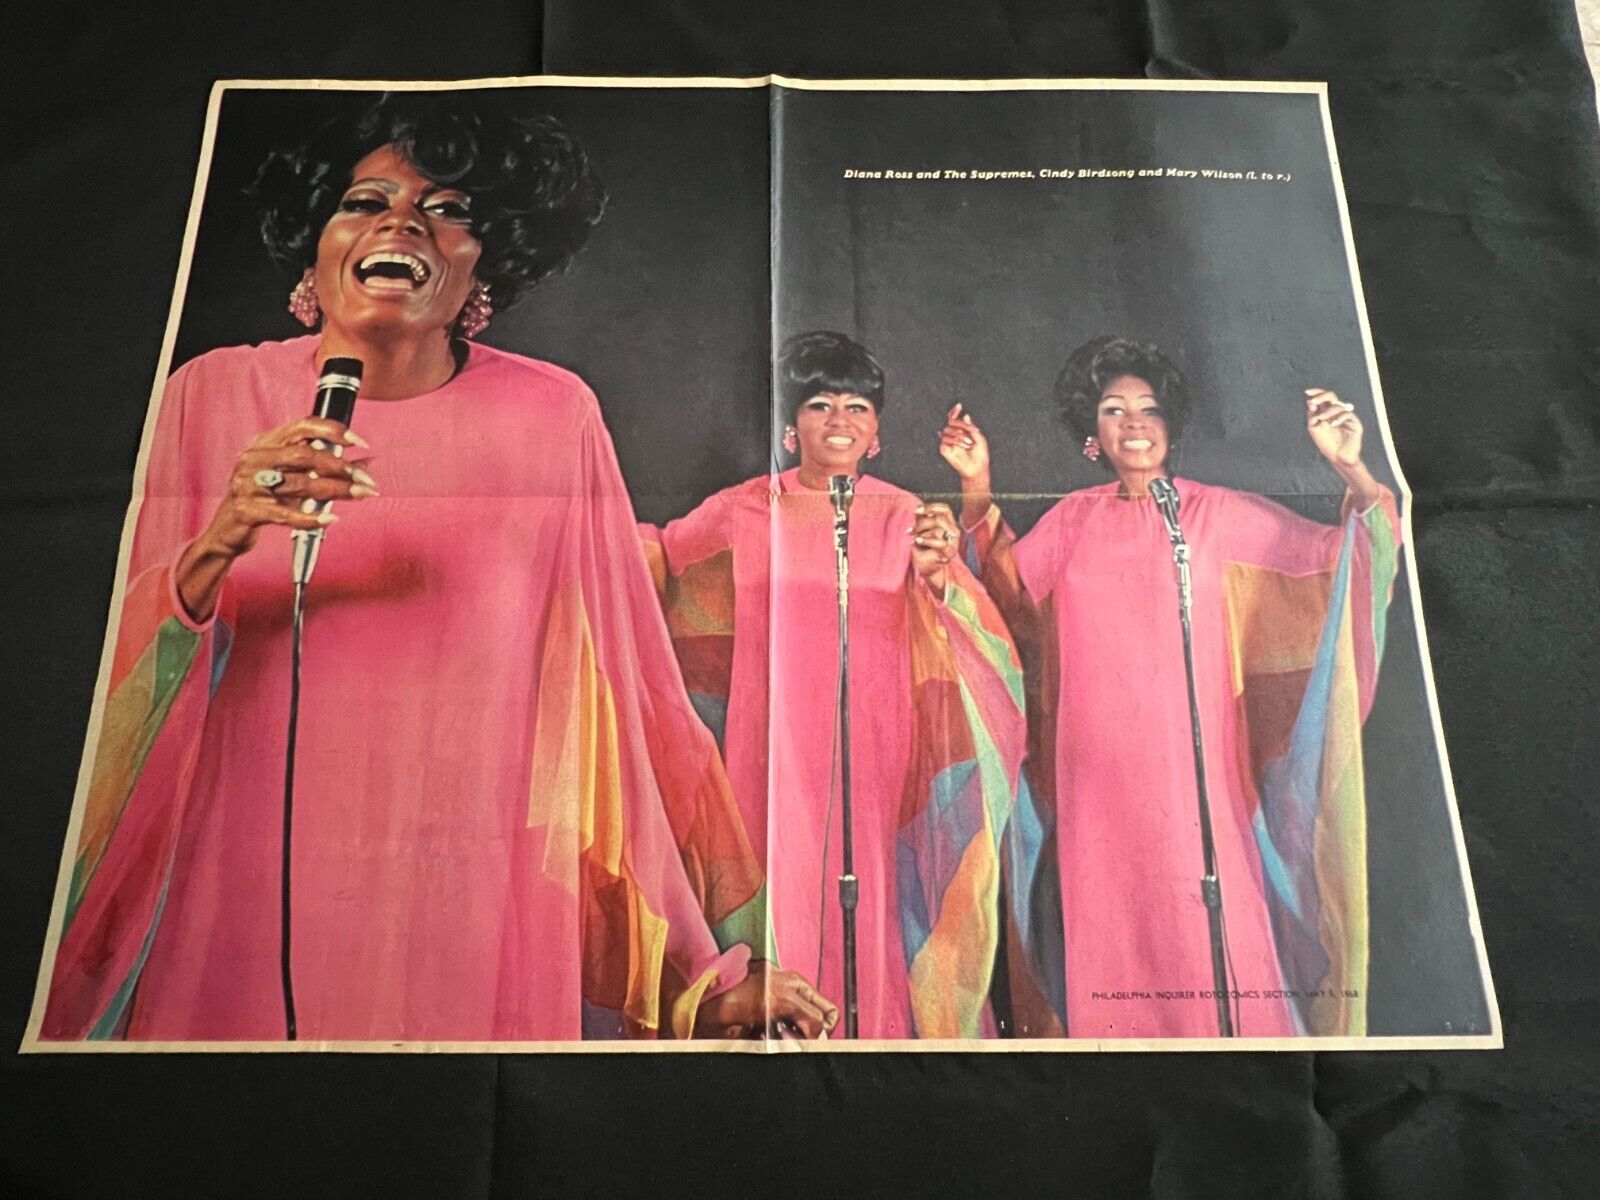 DIANA ROSS AND THE SUPREMES Sunday Comics Section Poster 1968 Cindy Birdsong